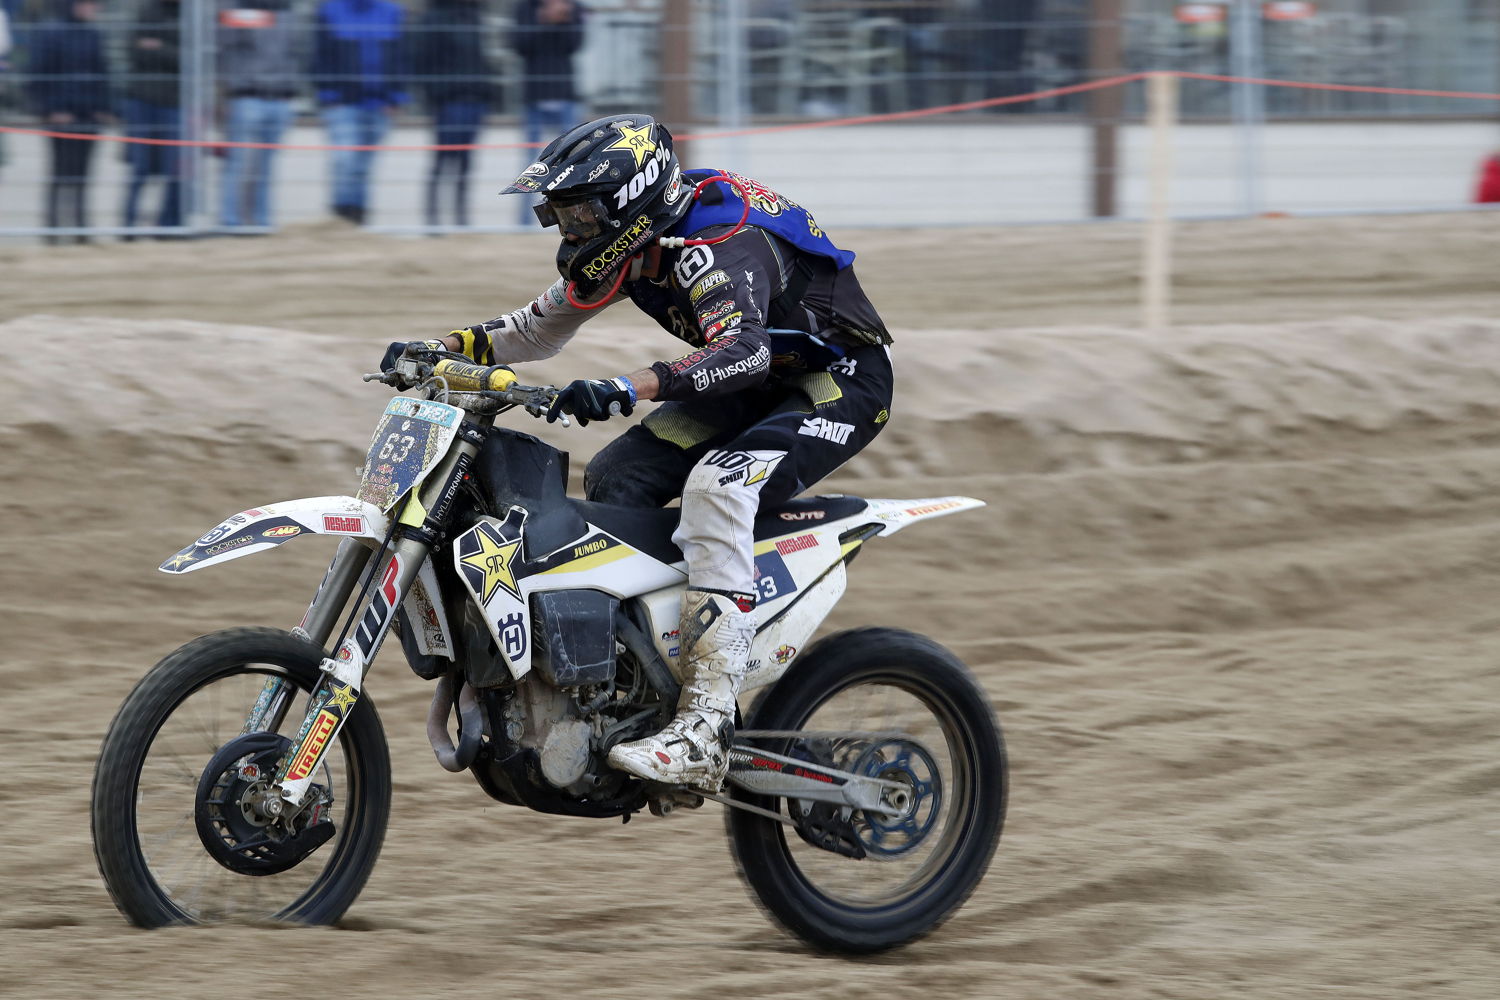 Yentel Martens at Red Bull Knock Out, credit: Future7Media